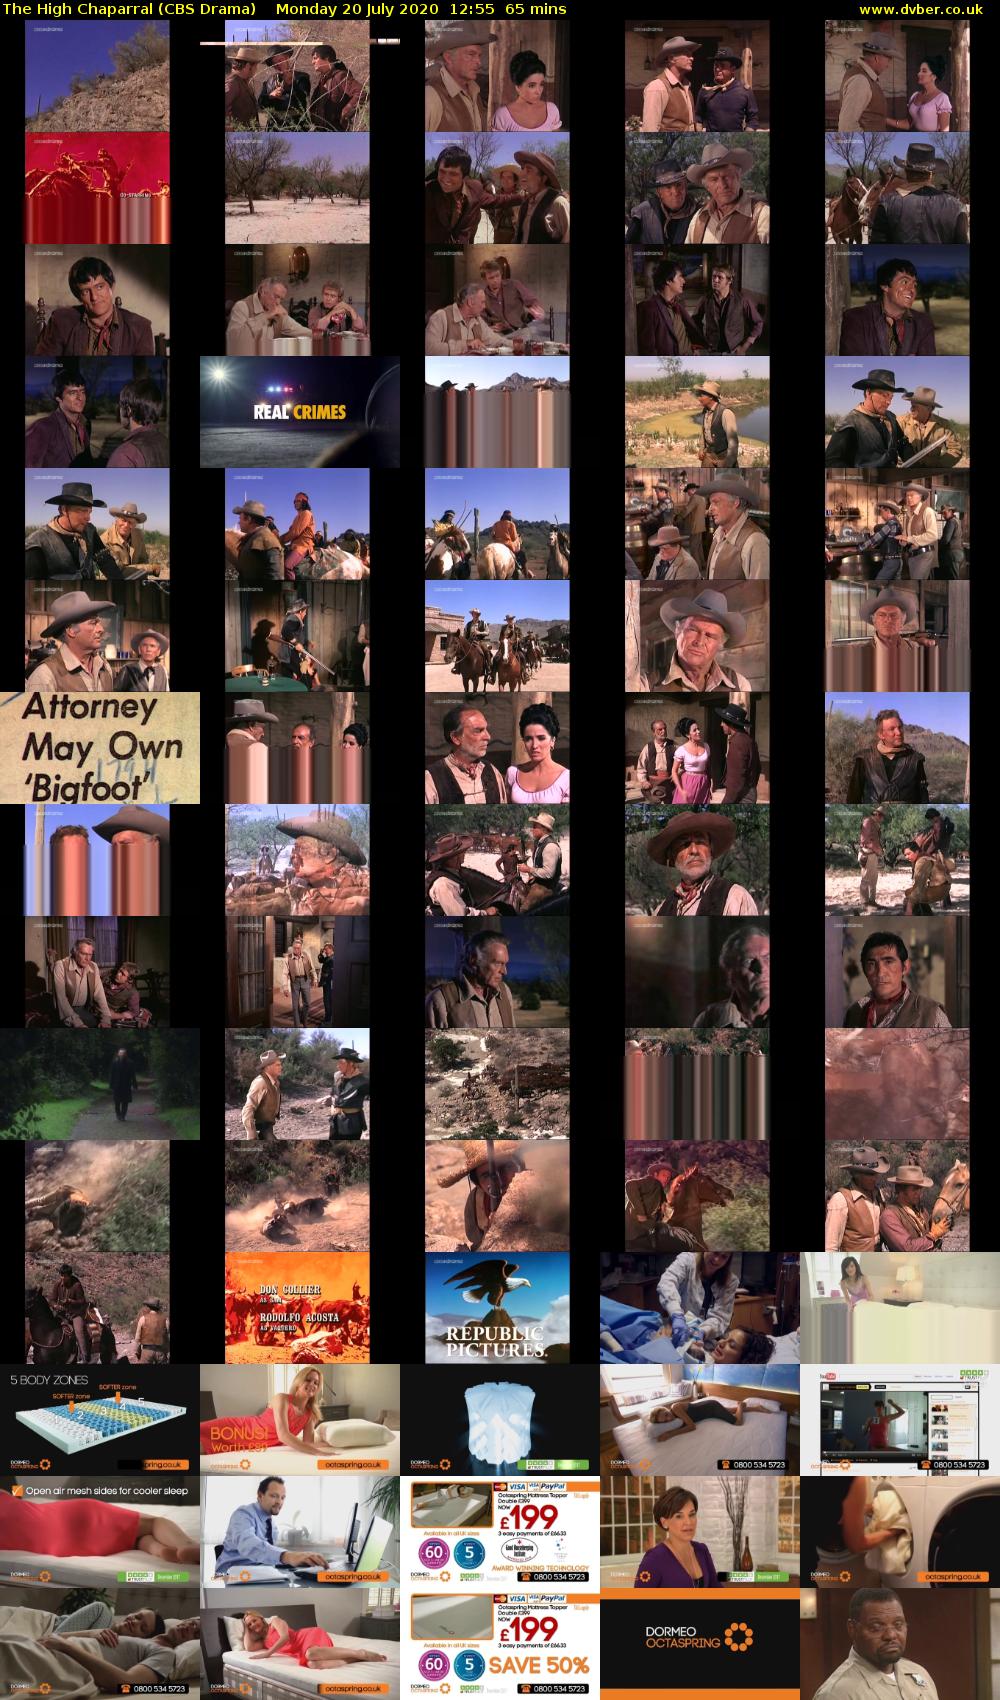 The High Chaparral (CBS Drama) Monday 20 July 2020 12:55 - 14:00